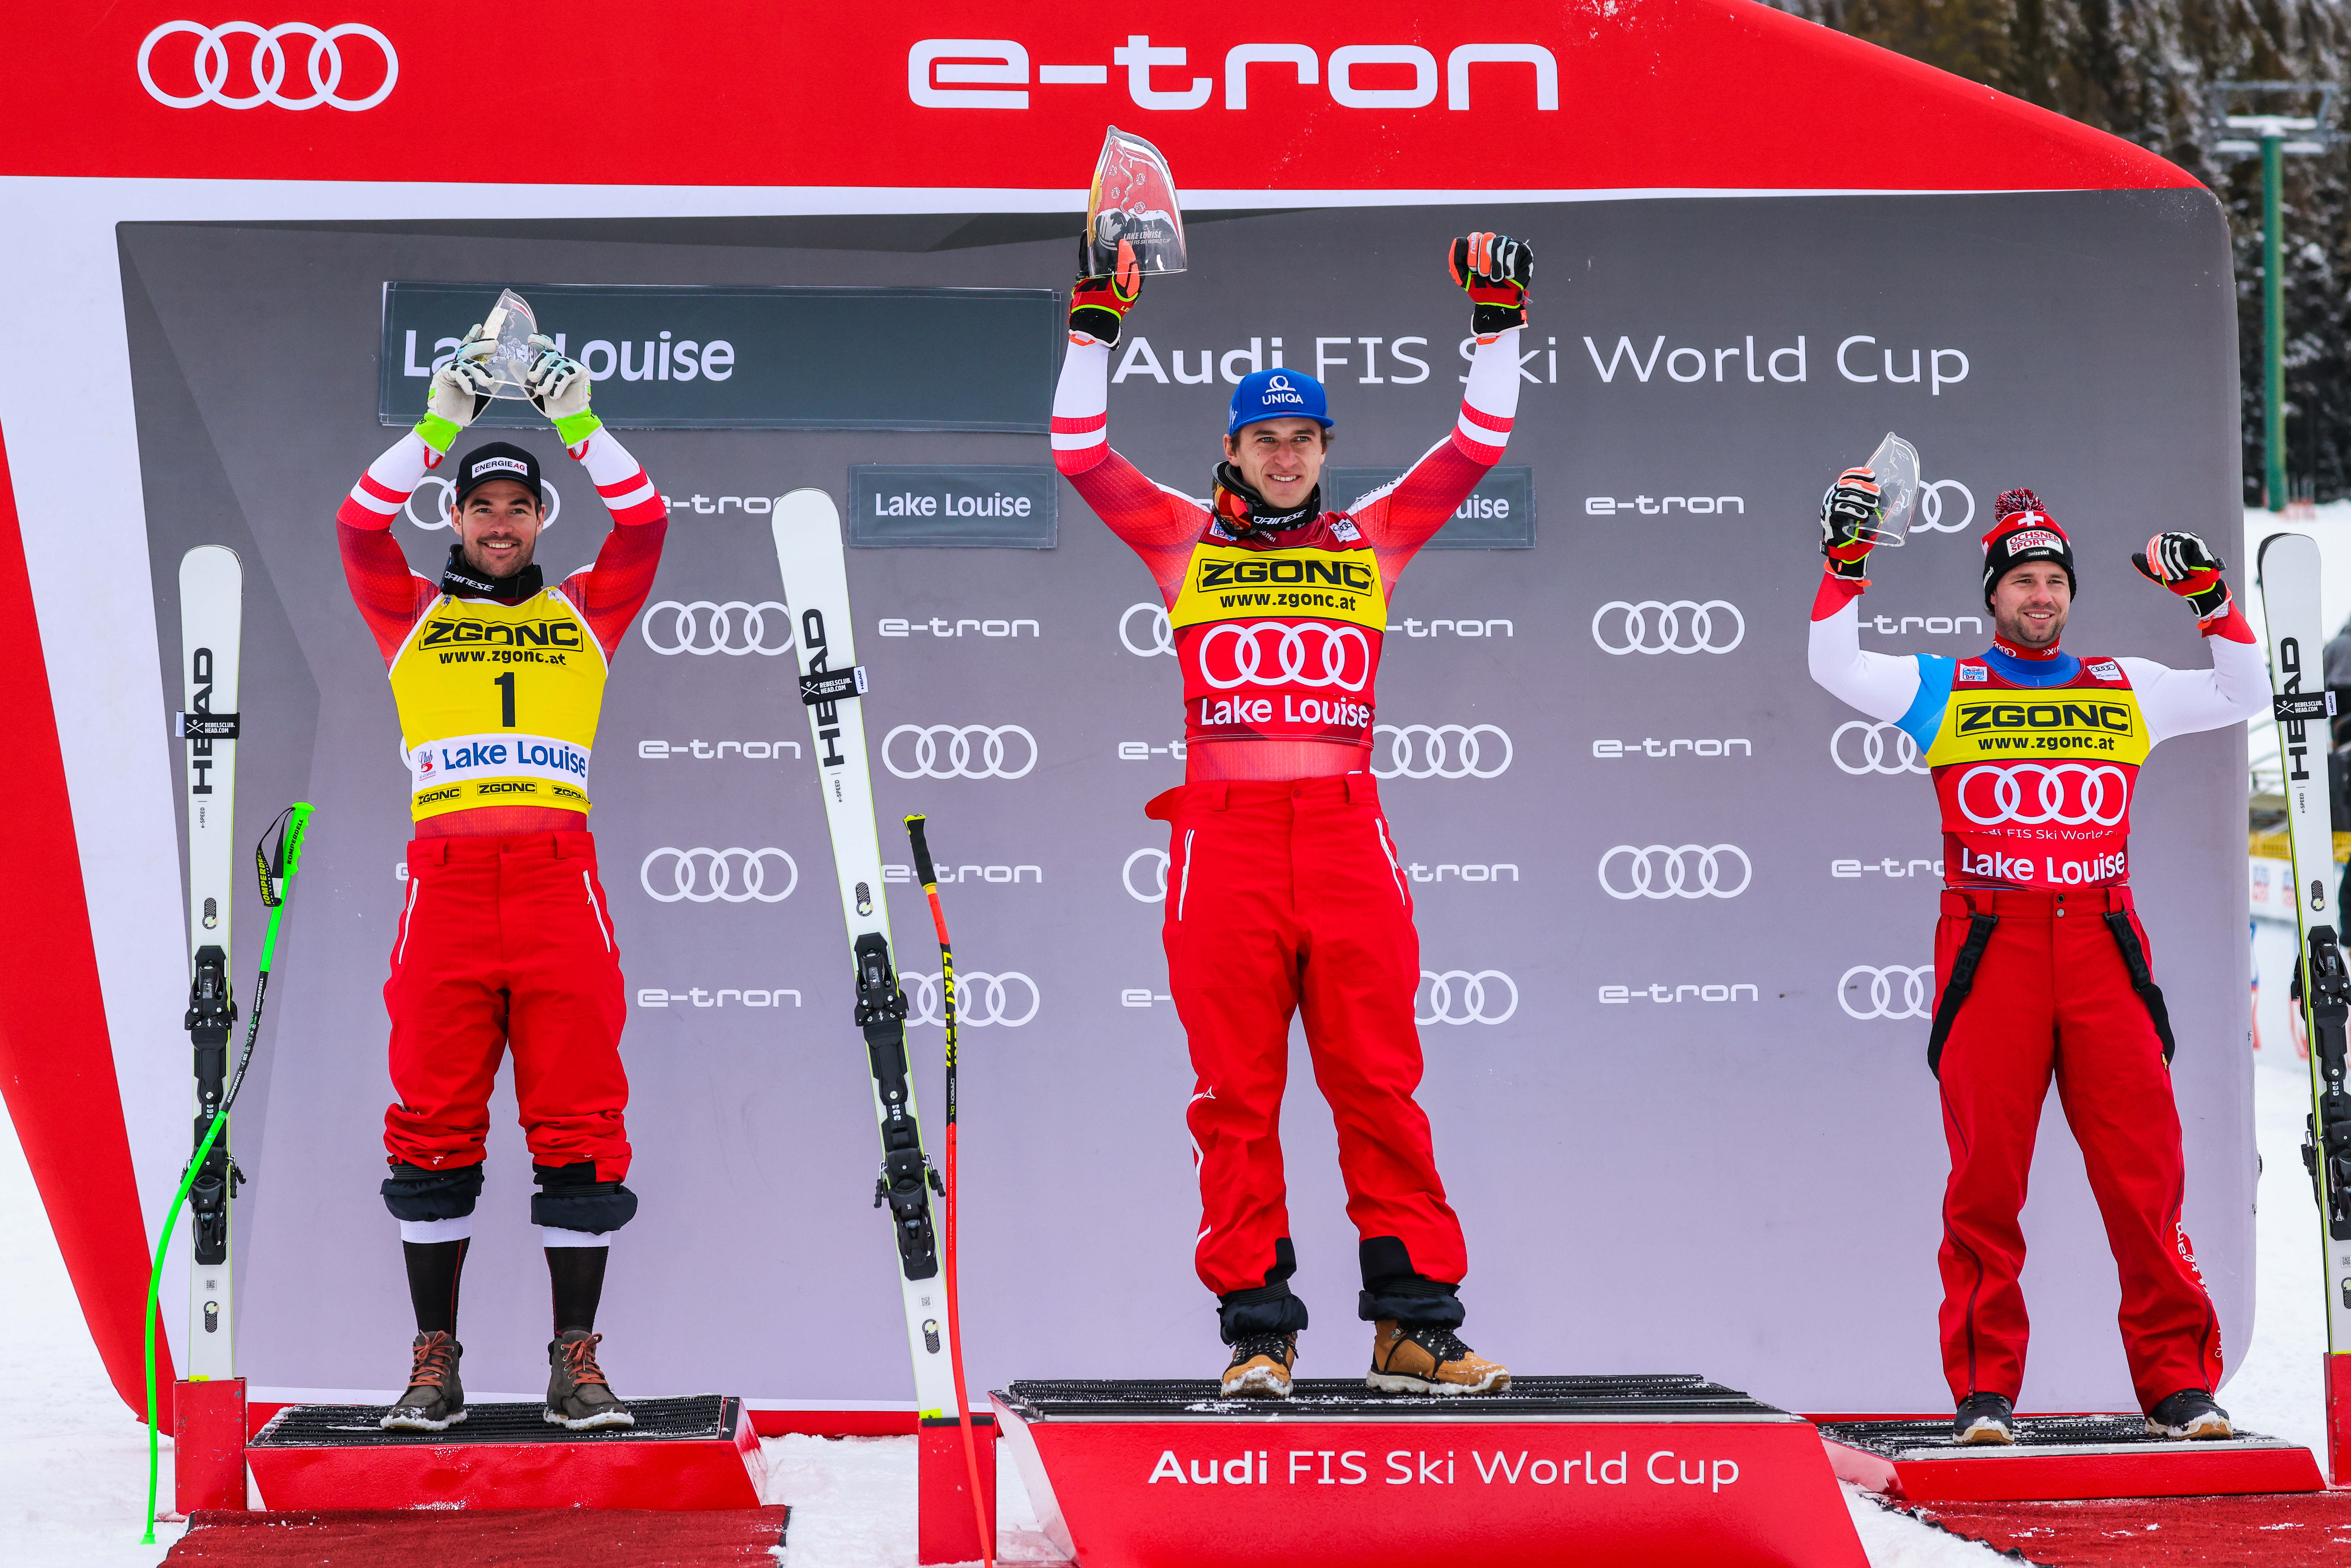 Nov 27, 2021; Lake Louise, Alberta, CAN; Vincent Kriechmayr of Austria (left) and Matthias Mayer of Austria (middle) and Beat Feuz of Switzerland (right) celebrate on the podium during men's downhill race at the FIS alpine skiing World Cup at Lake Louise. Mandatory Credit: Sergei Belski-USA TODAY Sports